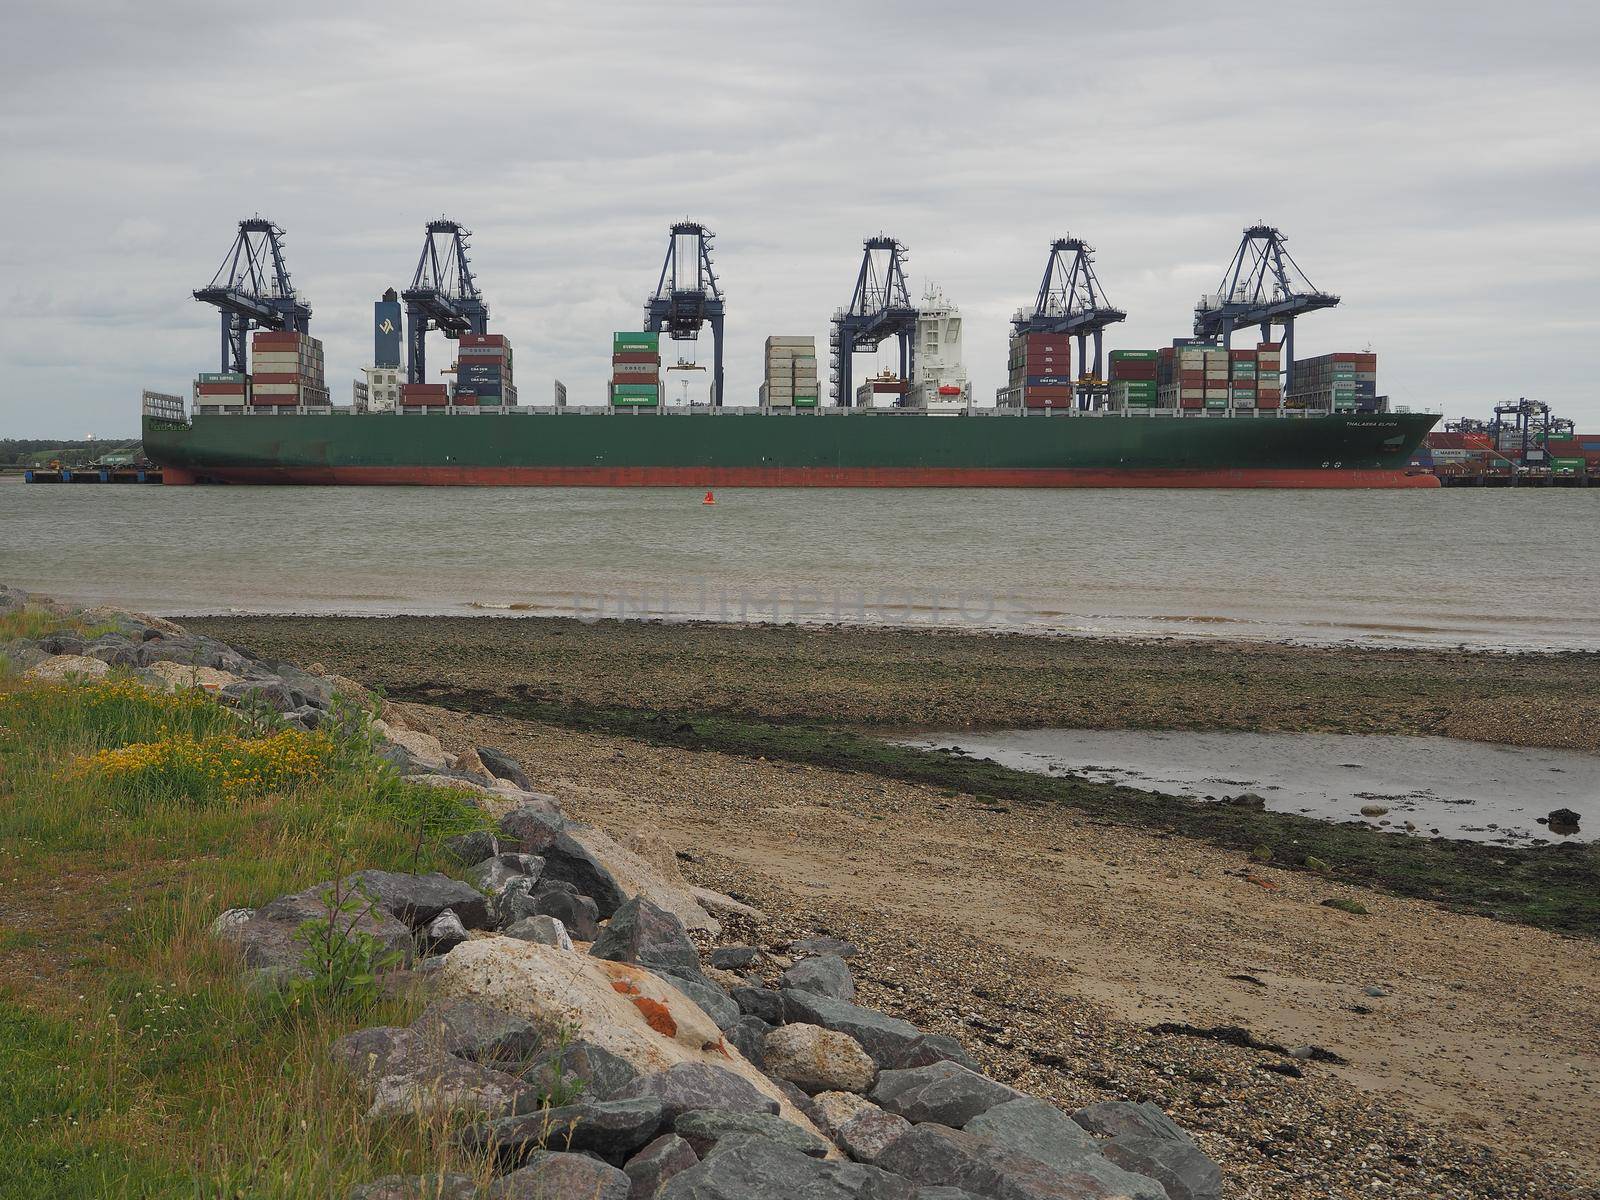 Port of Felixstowe, Suffolk, UK, June 11 2017: Cranes loading containers onto the Thalassa Elpida cargo ship viewed from Shotley Point looking across the River Orwell